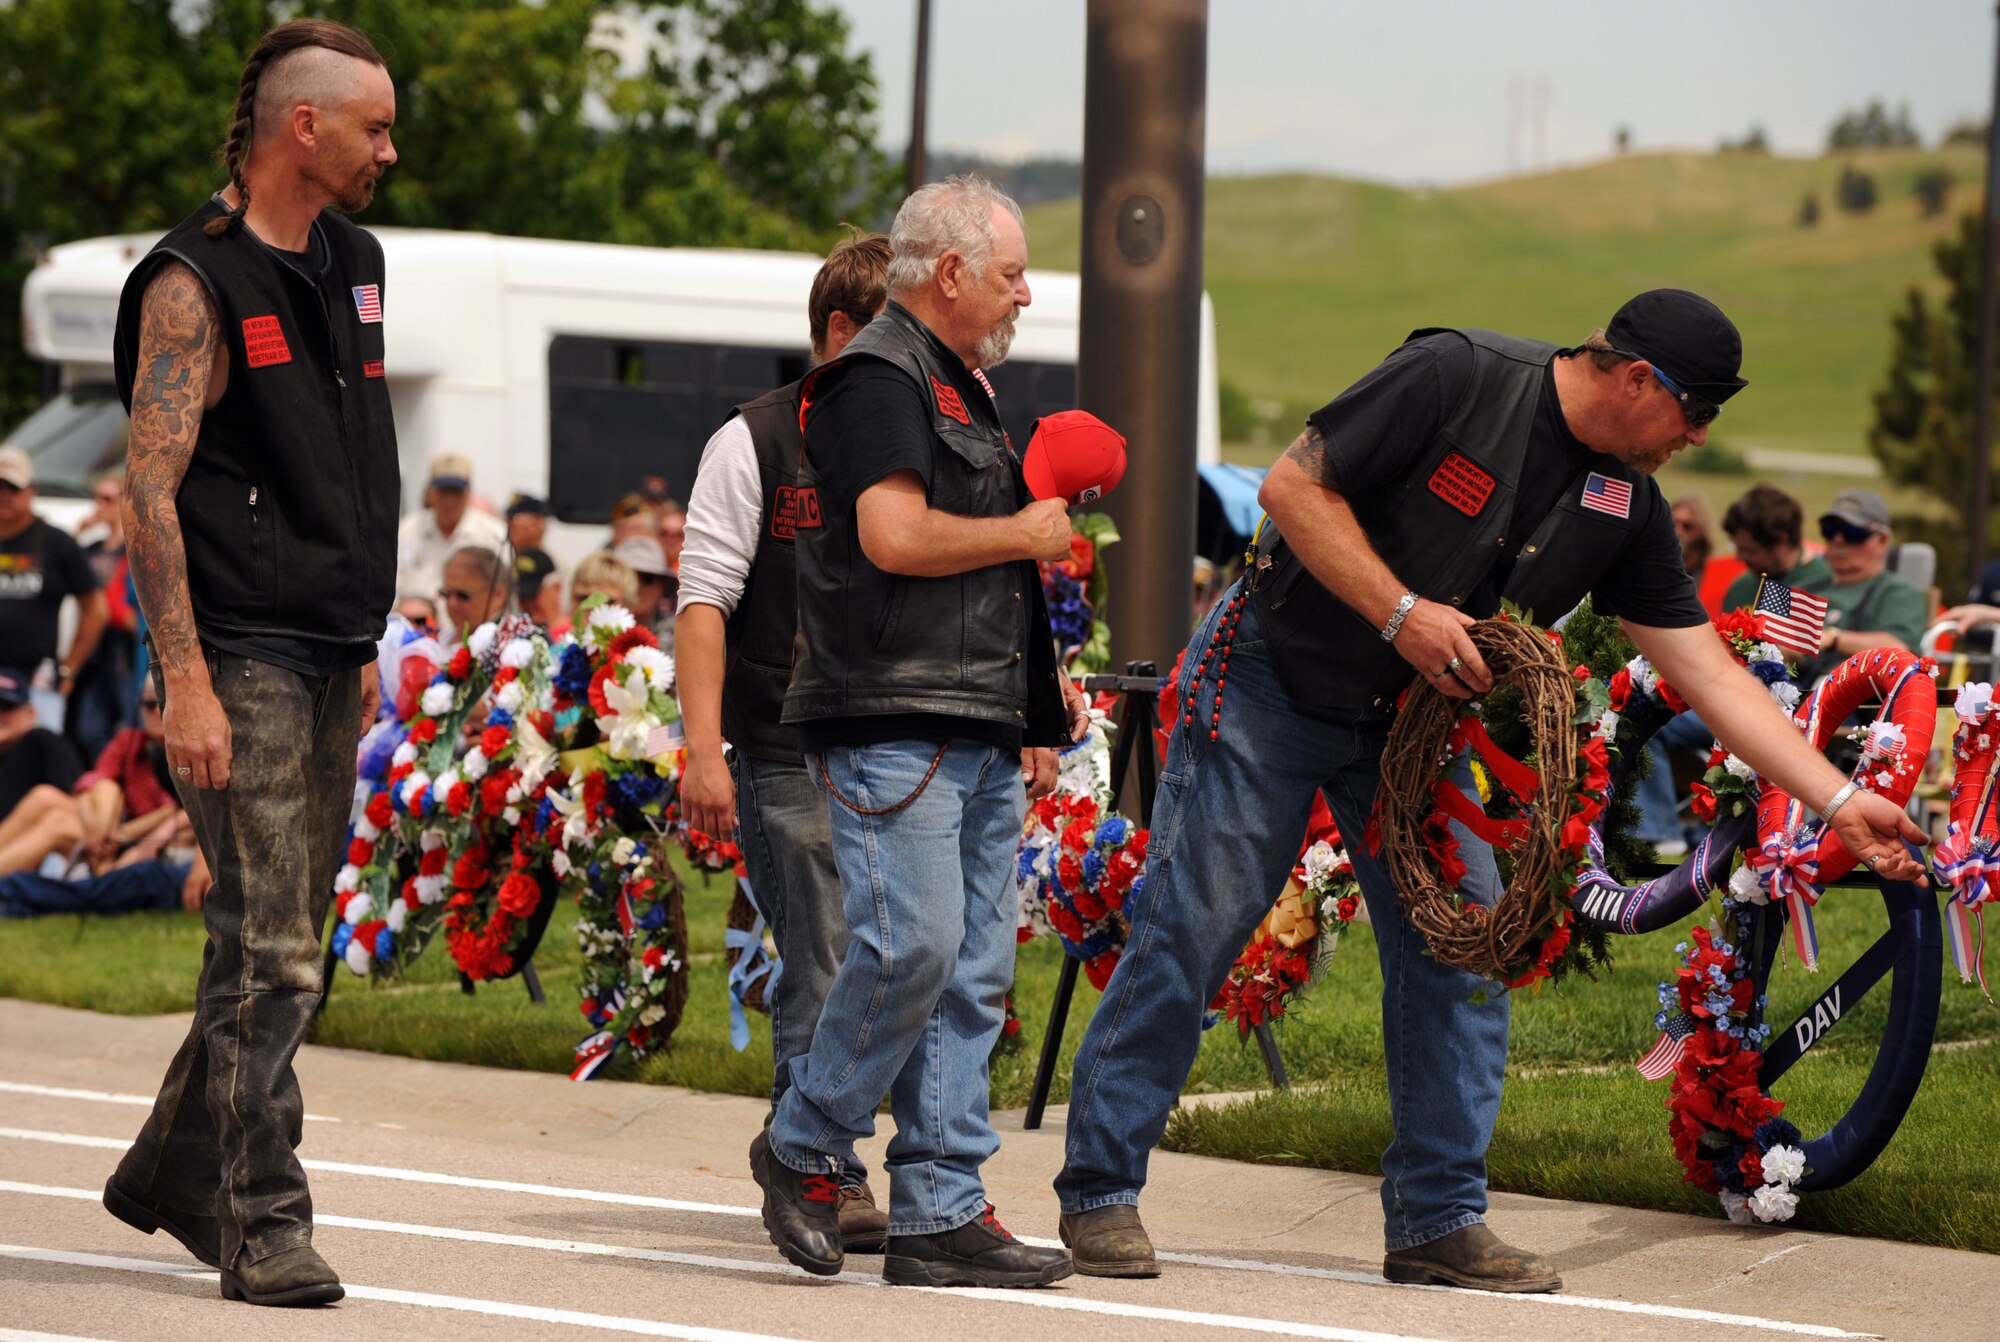 Members of the Second Brigade Motorcycle Club lay down a wreath during the Memorial Day ceremony at the Black Hills National Cemetery in Sturgis, S.D., May 30, 2016. The laying of wreaths was a symbolic tribute to the men and women who died while serving on active duty. (U.S. Air Force photo by Airman 1st Class Denise M. Nevins/Released)